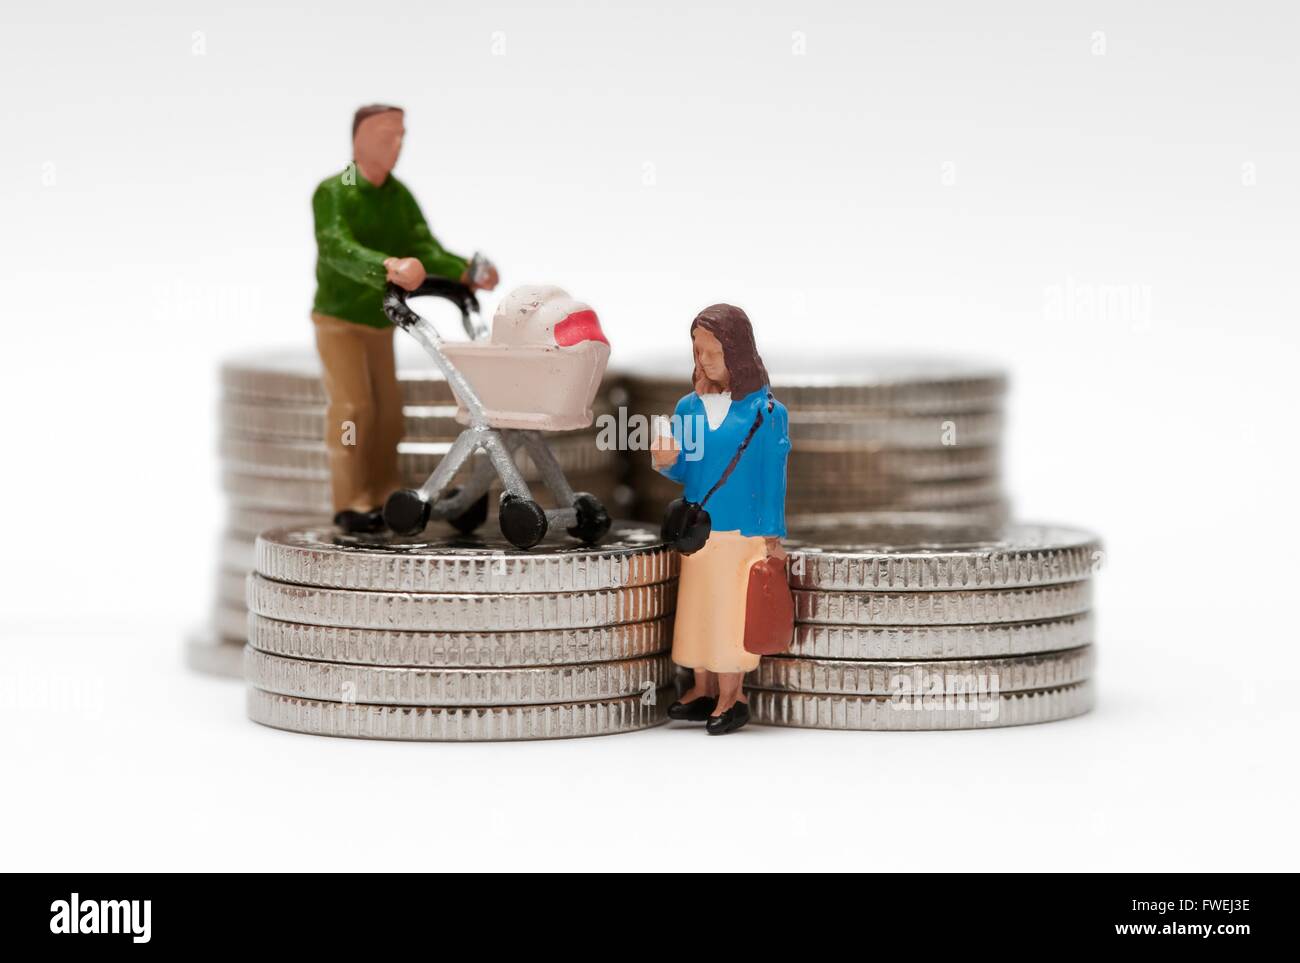 A miniature figurine married couple with a pram standing on silver colored coins Stock Photo